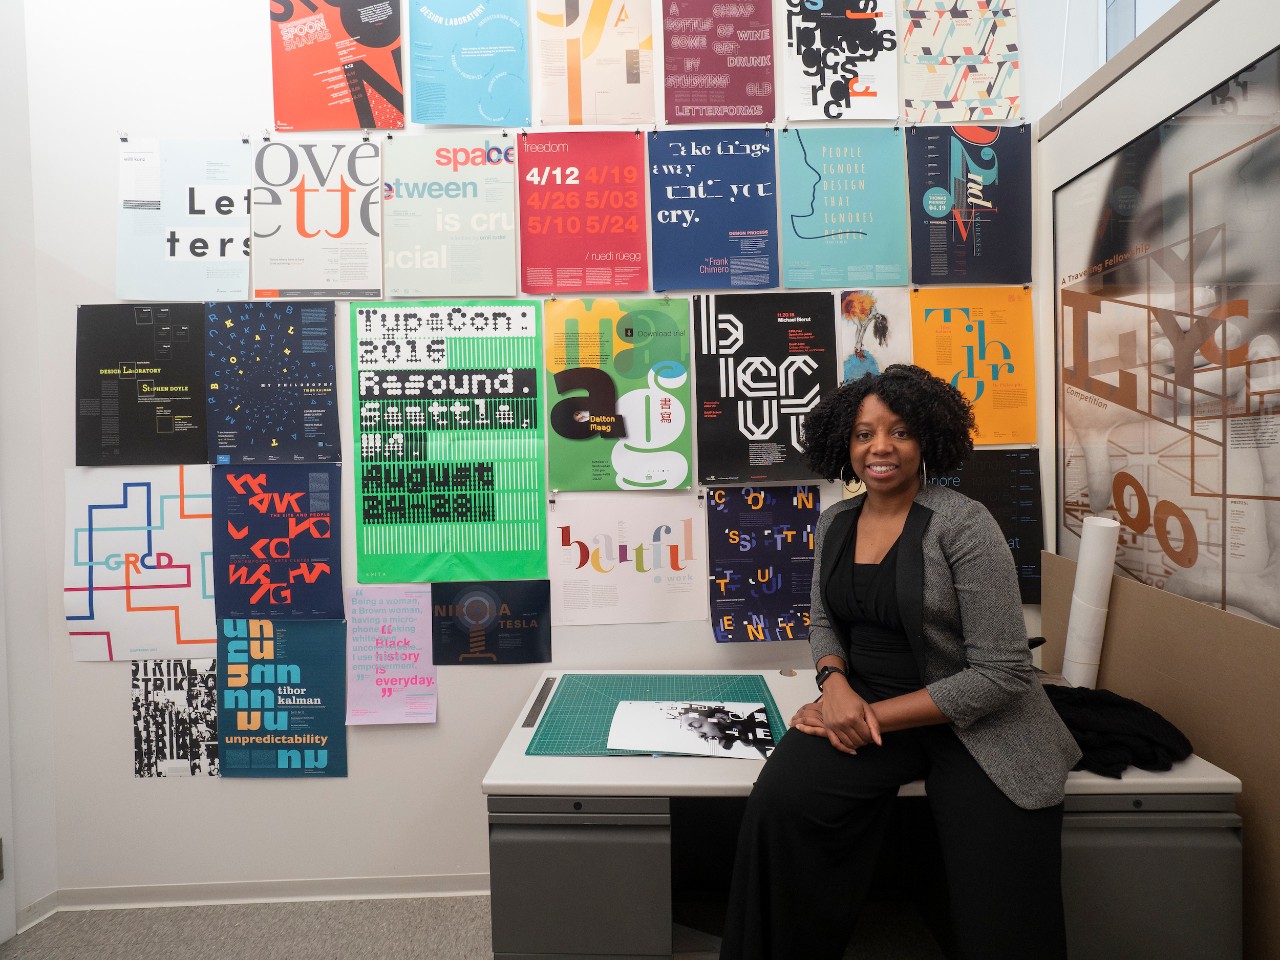 Reneé Seward poses in her office in front of posters